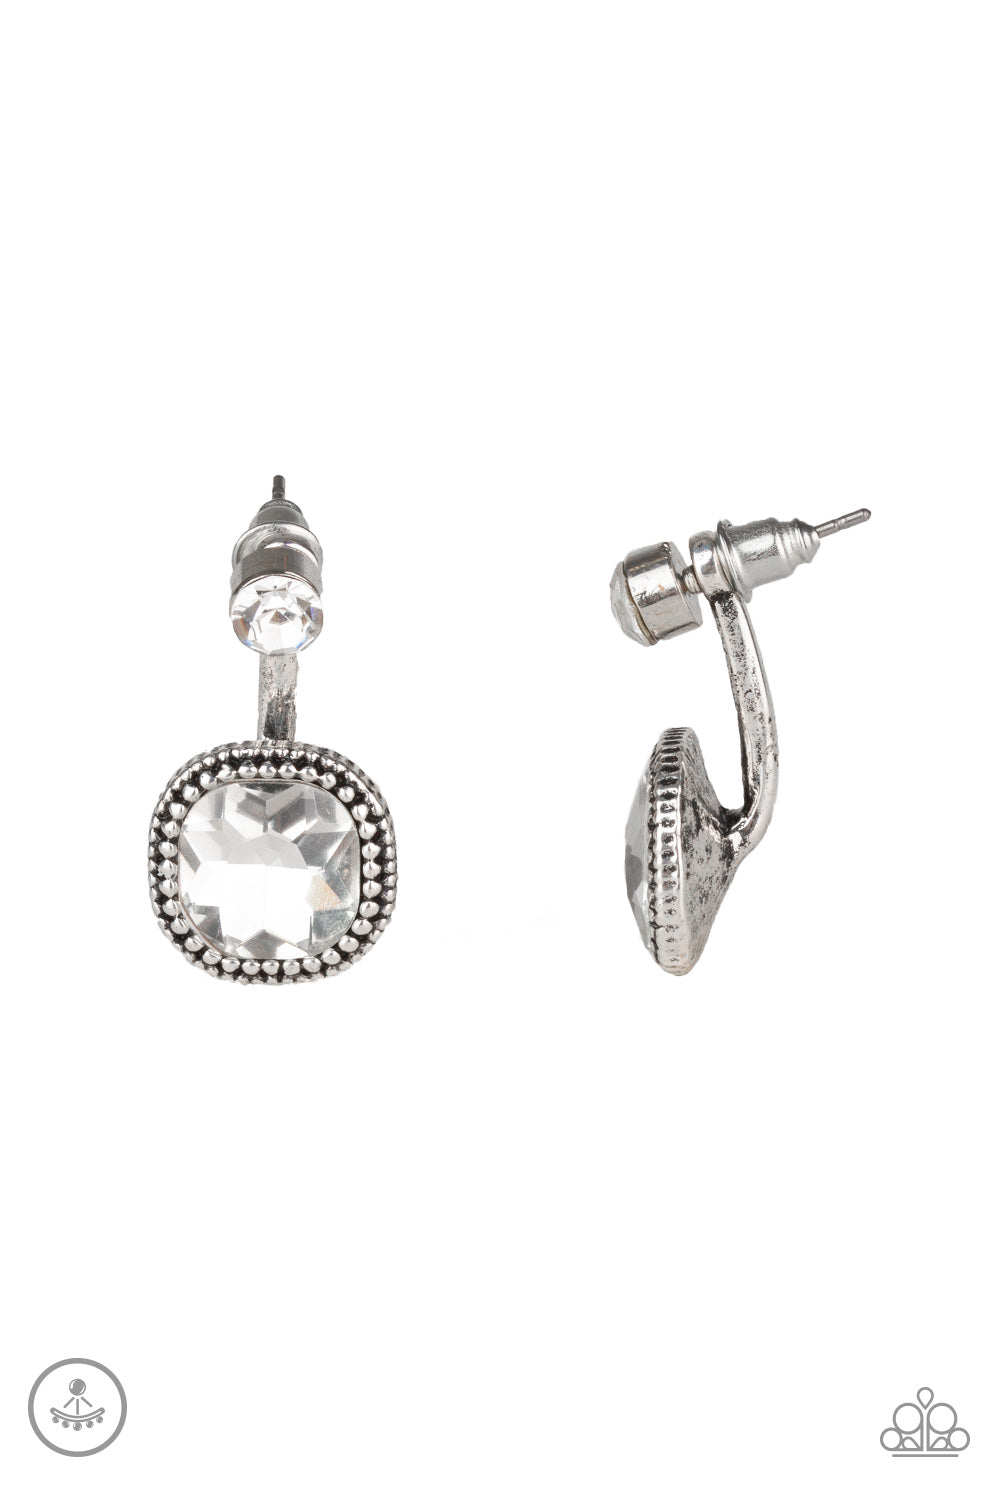 Paparazzi Celebrity Cache - White Double-Sided Post Earrings - A Finishing Touch 